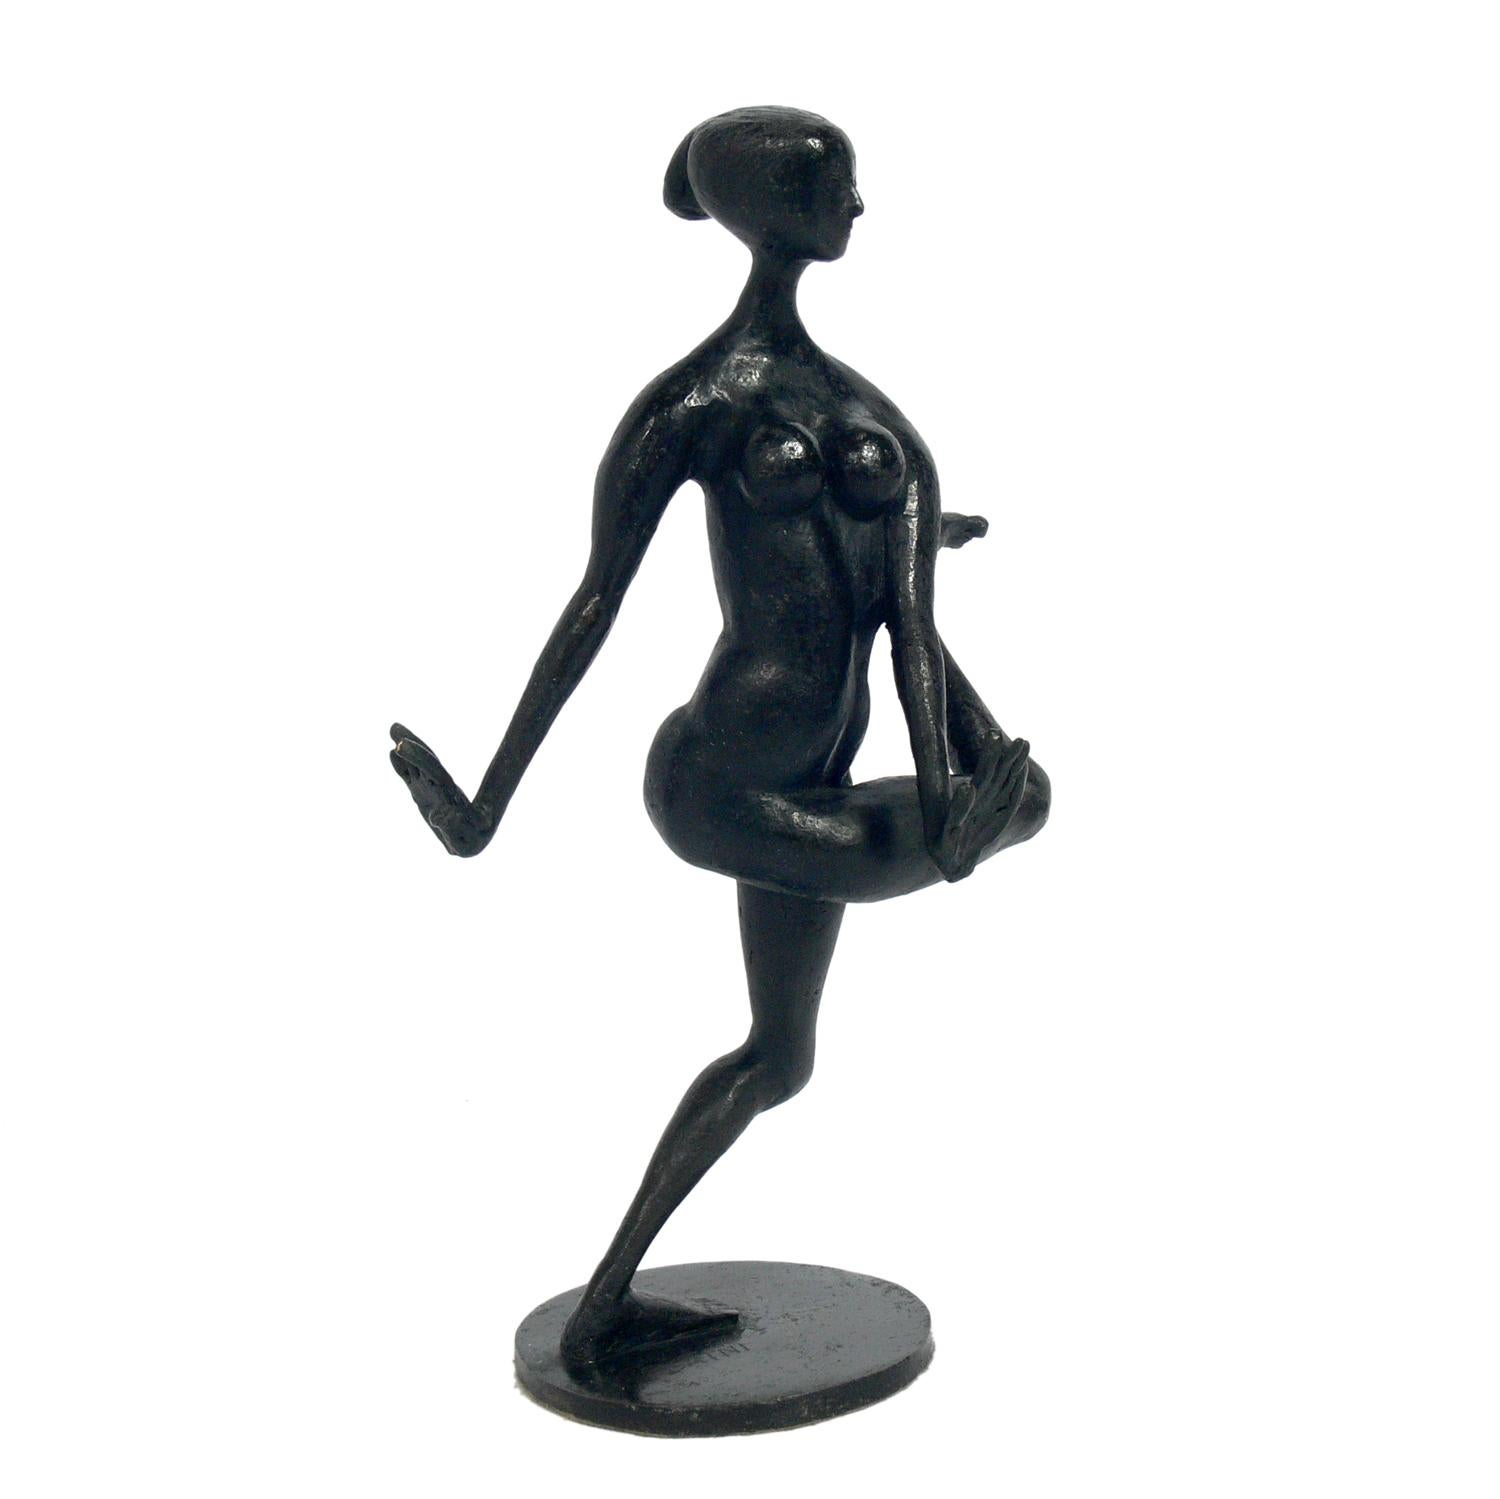 Modernist Figural Bronze Sculptures by Hugo Daini, Italian, 1919-1976. These sculptures are probably circa 1950s. The standing figure measures 13